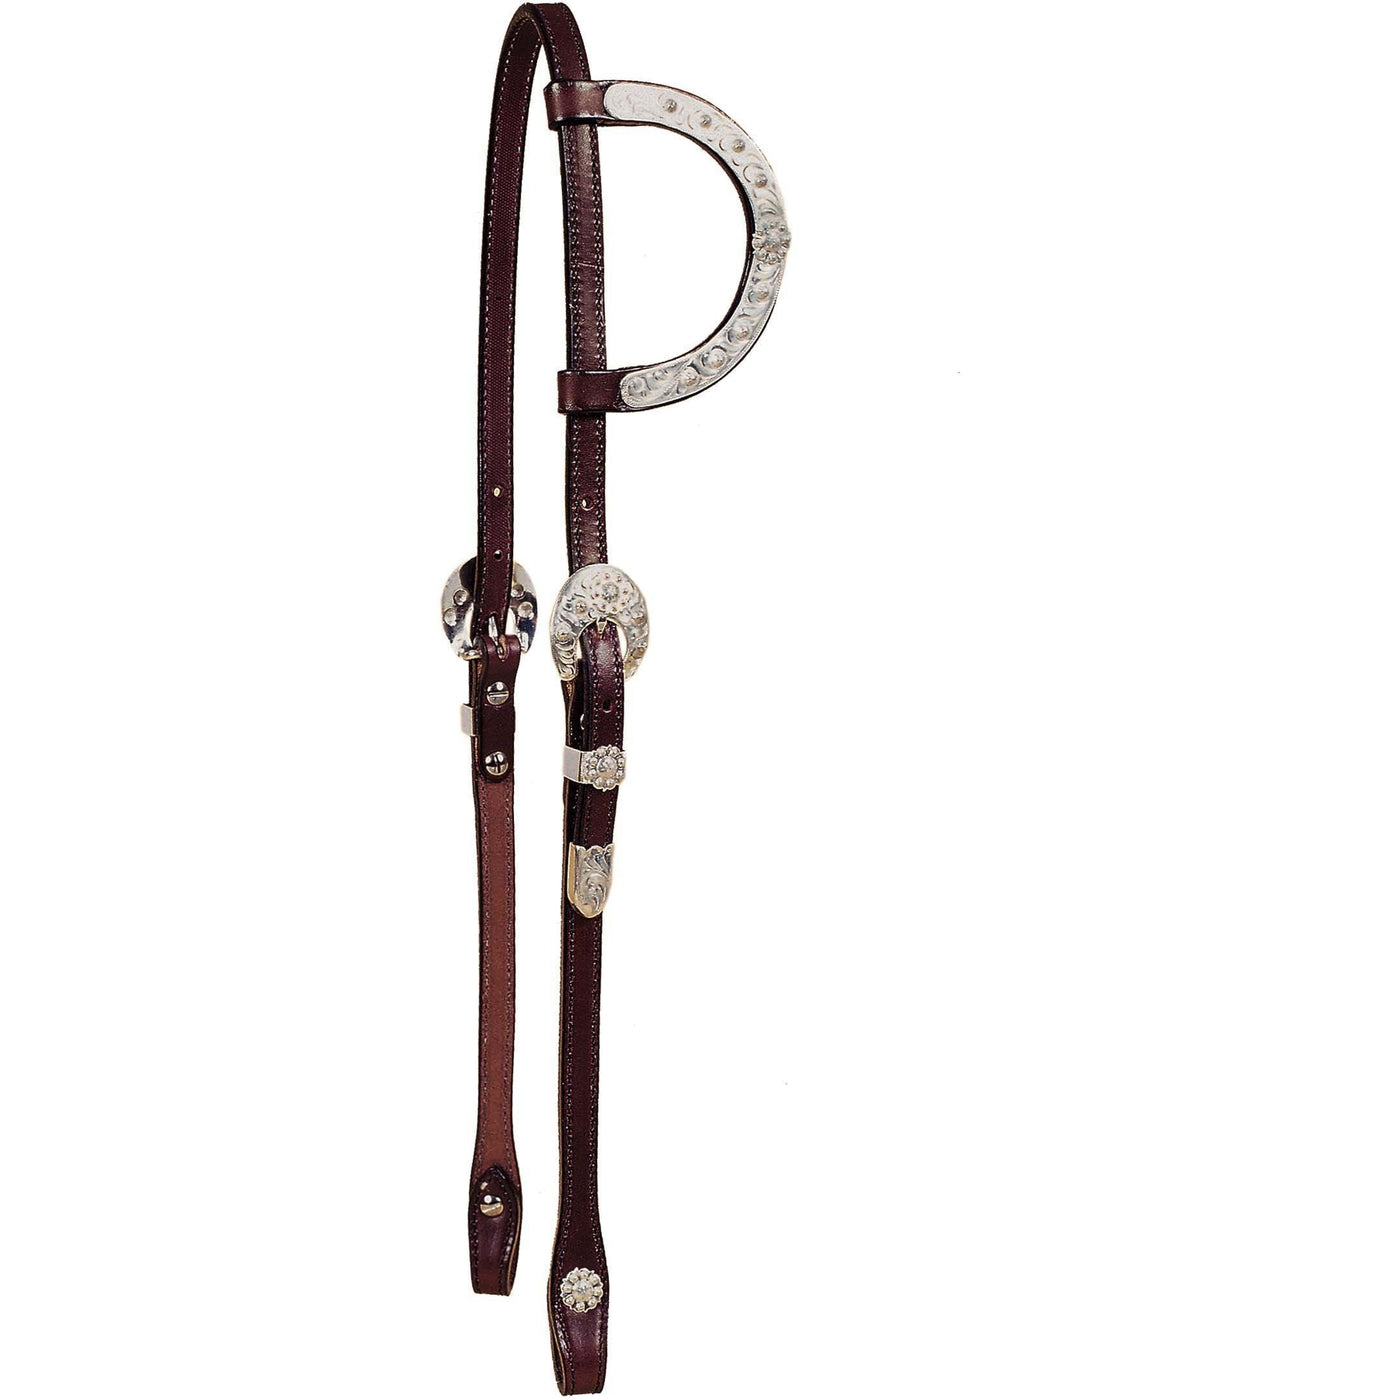 Tory Leather San Diego Berry One Ear Show Headstall - West 20 Saddle Co.